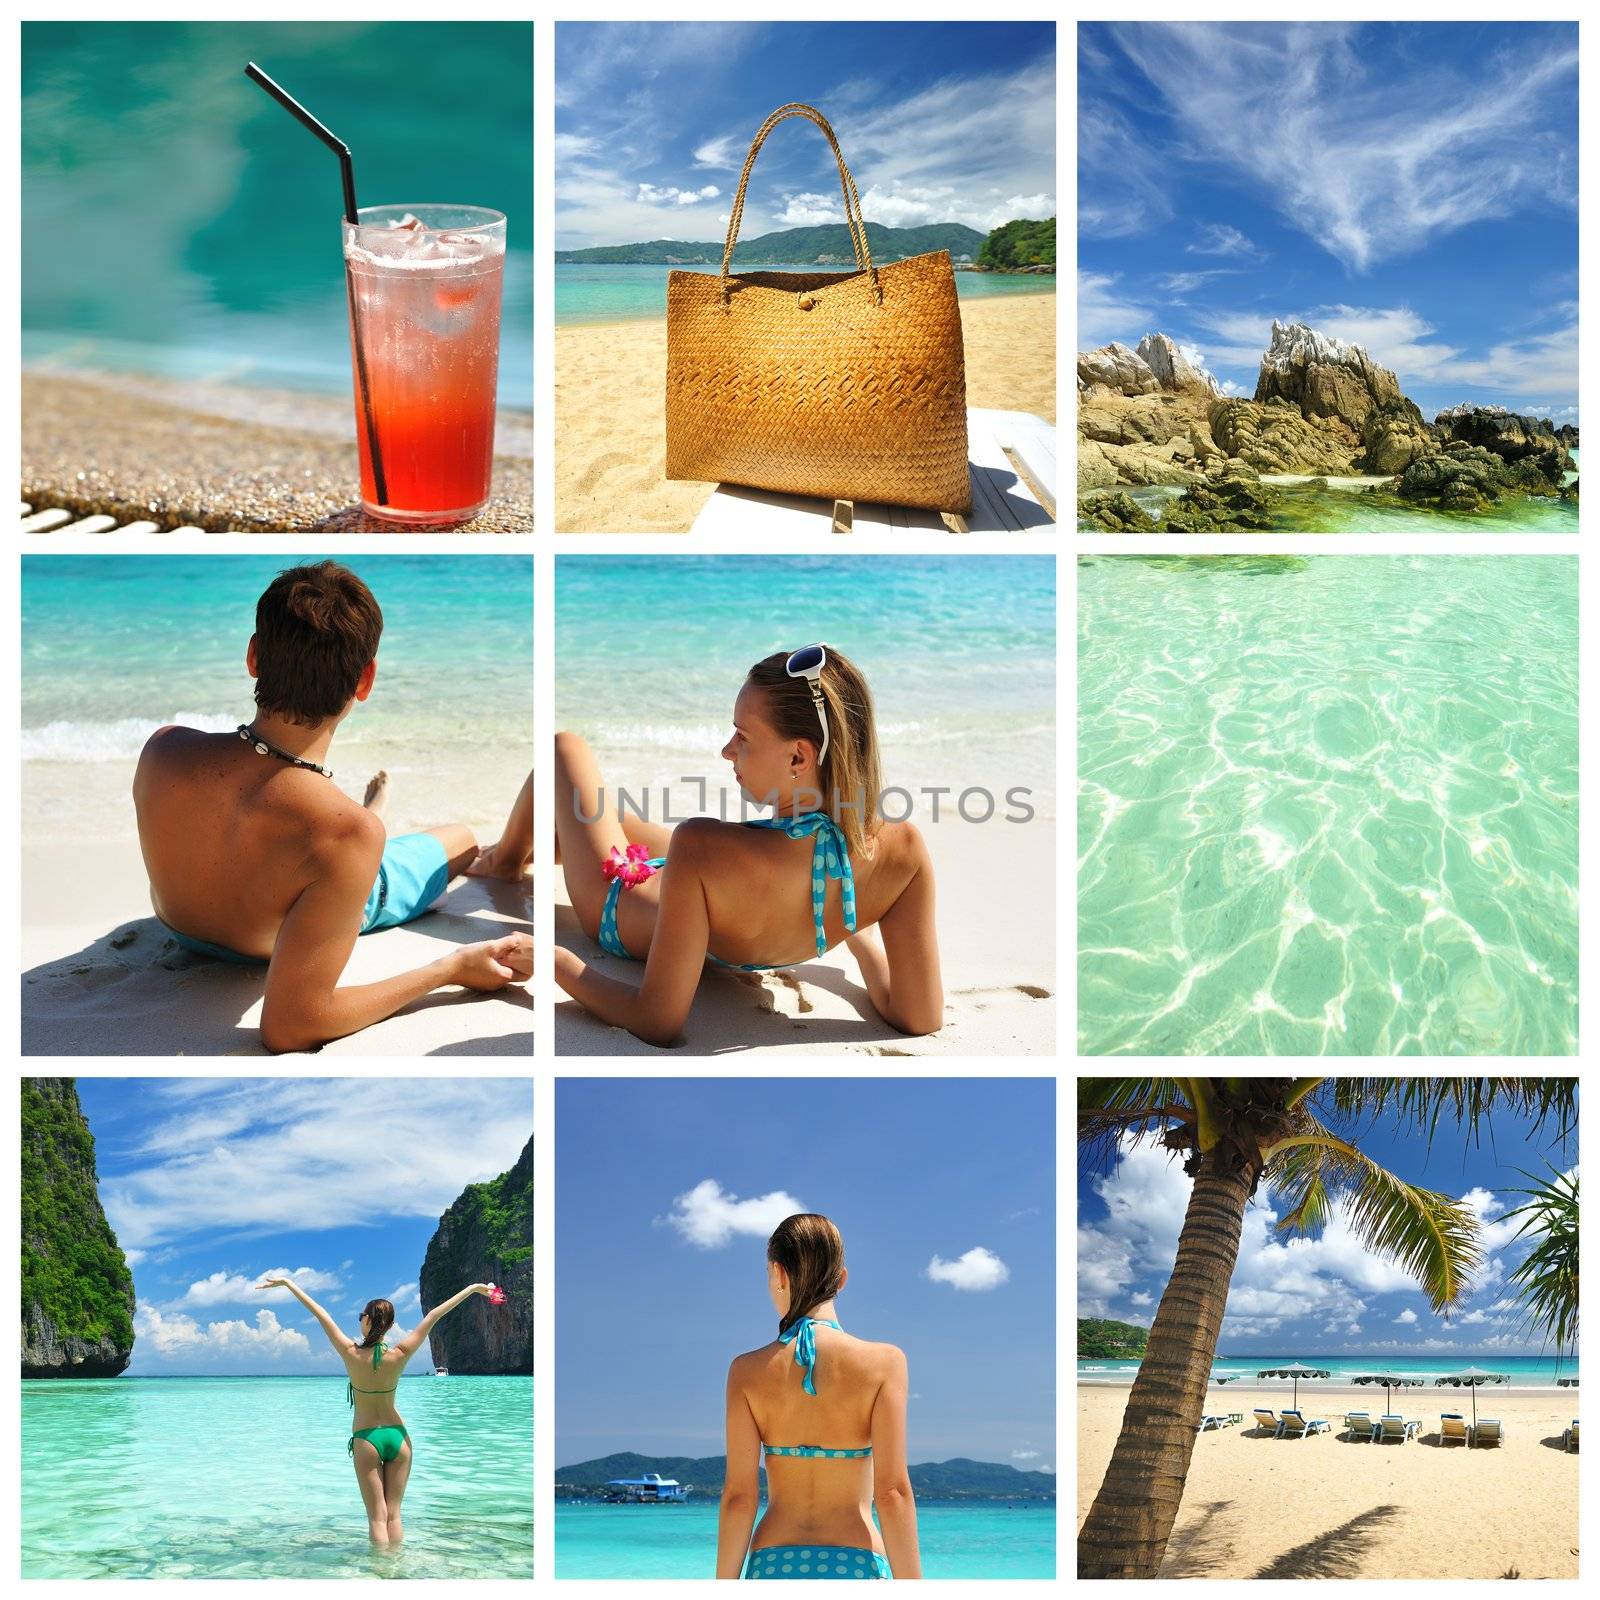 Collage made with beautiful tropical resort shots